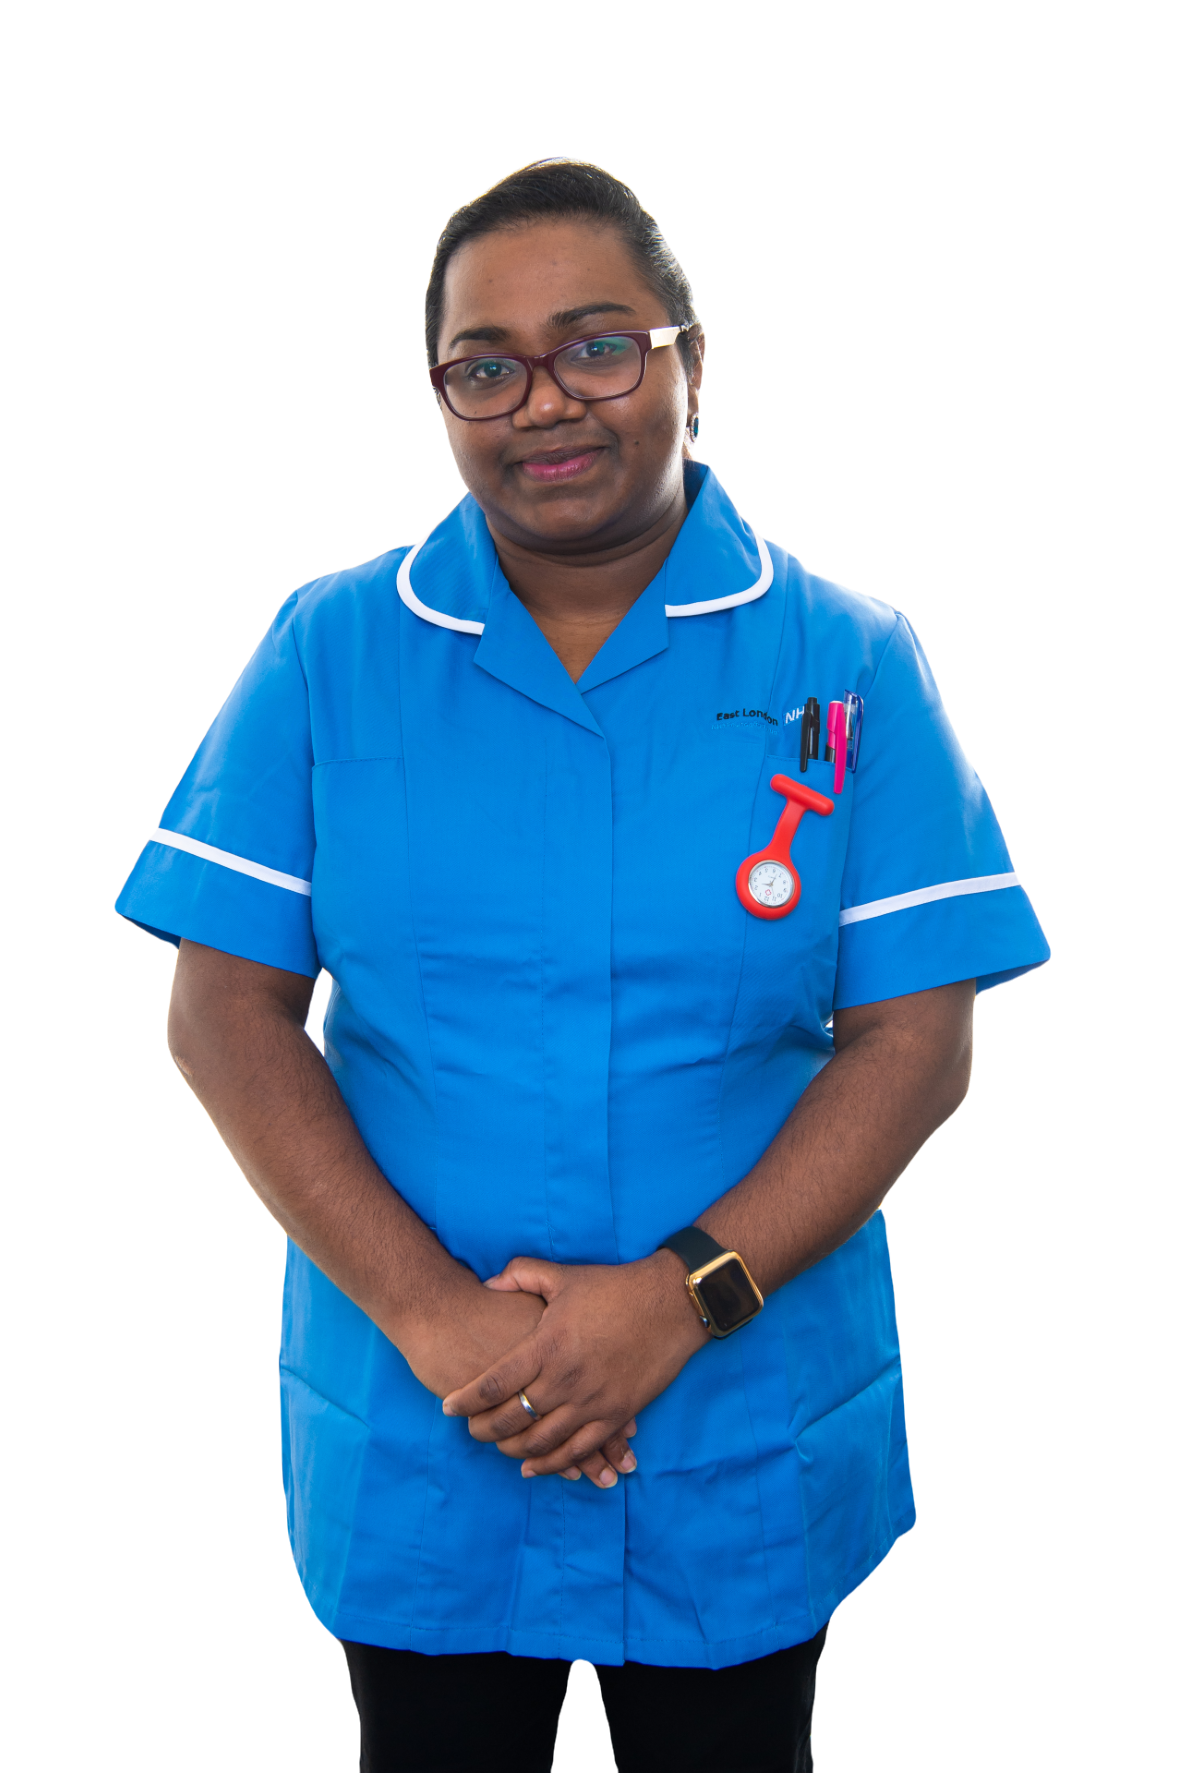 BAME, Female, Middle-Aged Nurse in Community Uniform with Glasses, Face-Forward and Arms Crossed Low